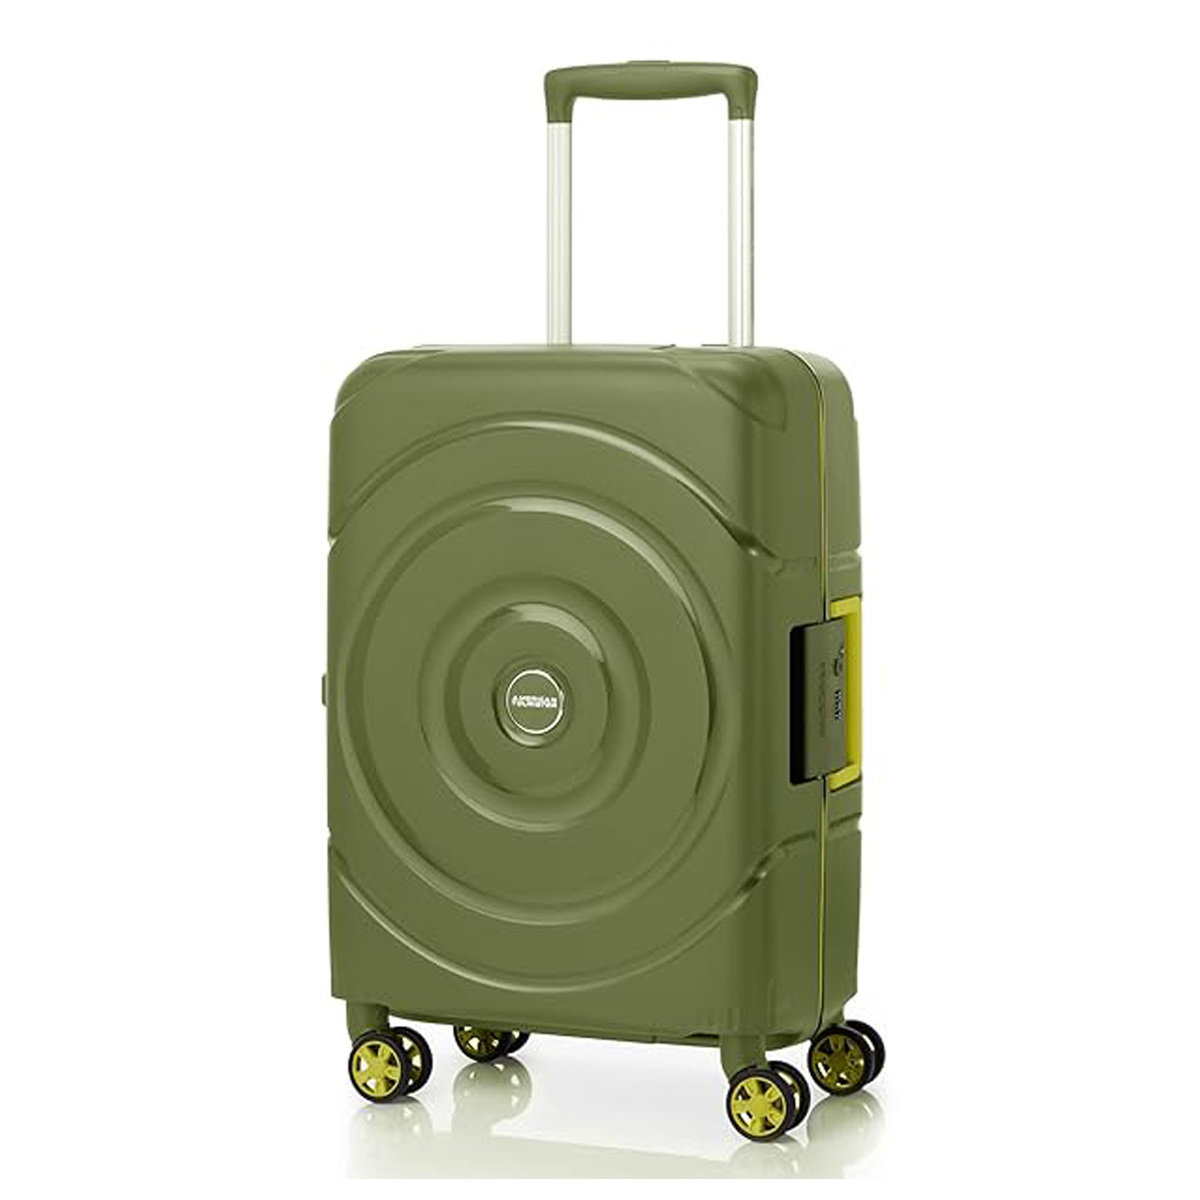 American Tourister Circurity Spinner Hard Trolley with TSA Combination Lock, 55 cm, Olive Green